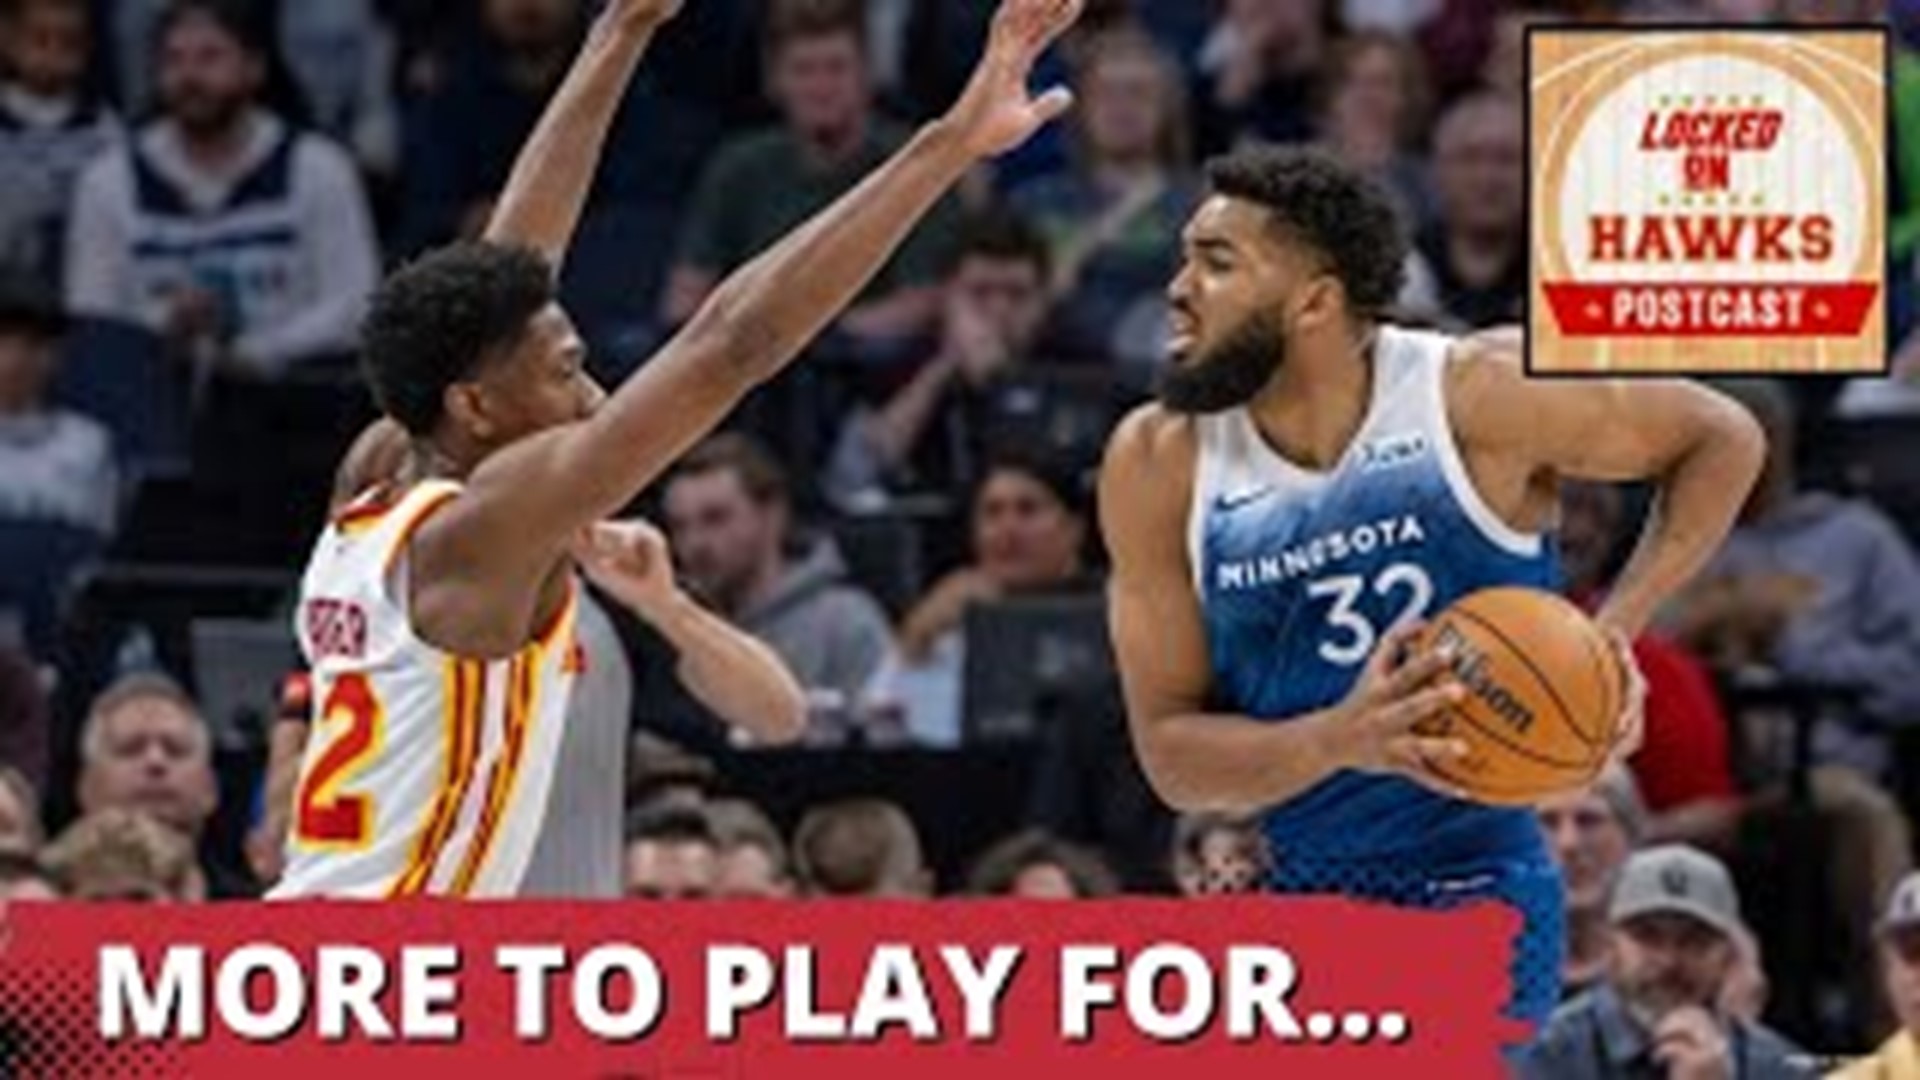 In an emotional game for the Minnesota Timberwolves whom are fighting for their lives to claim a number one seed in the NBA Playoffs representing the West.